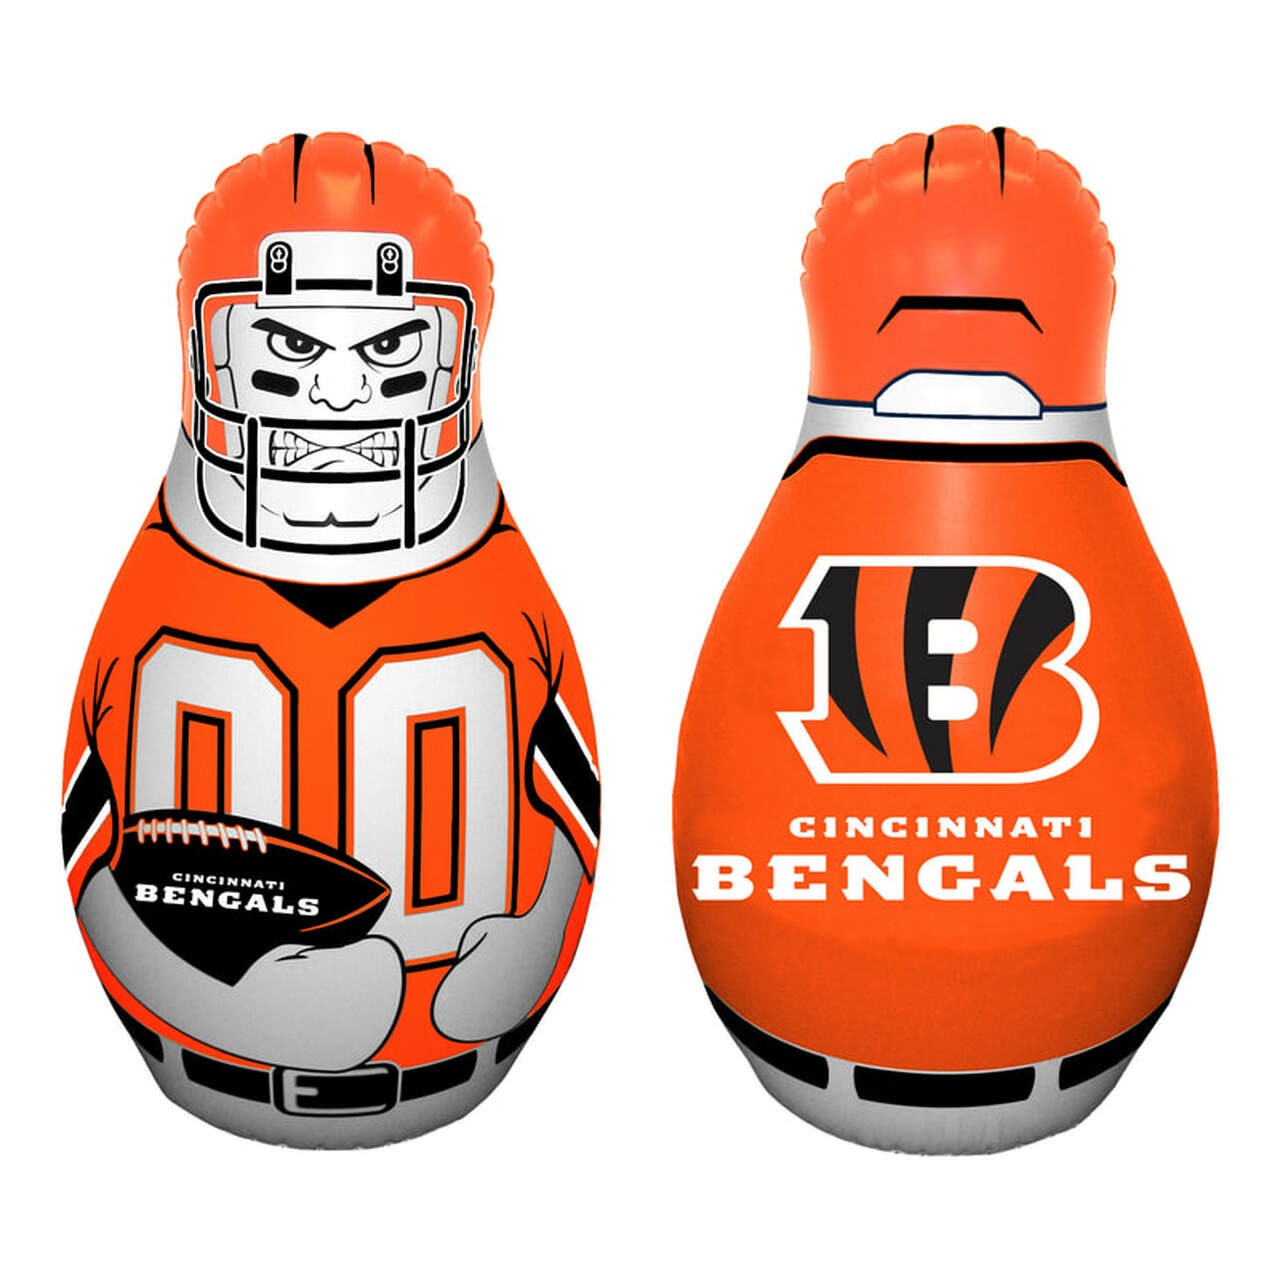 Kids inflatable toy punching bag with Cincinnati Bengals football player graphics